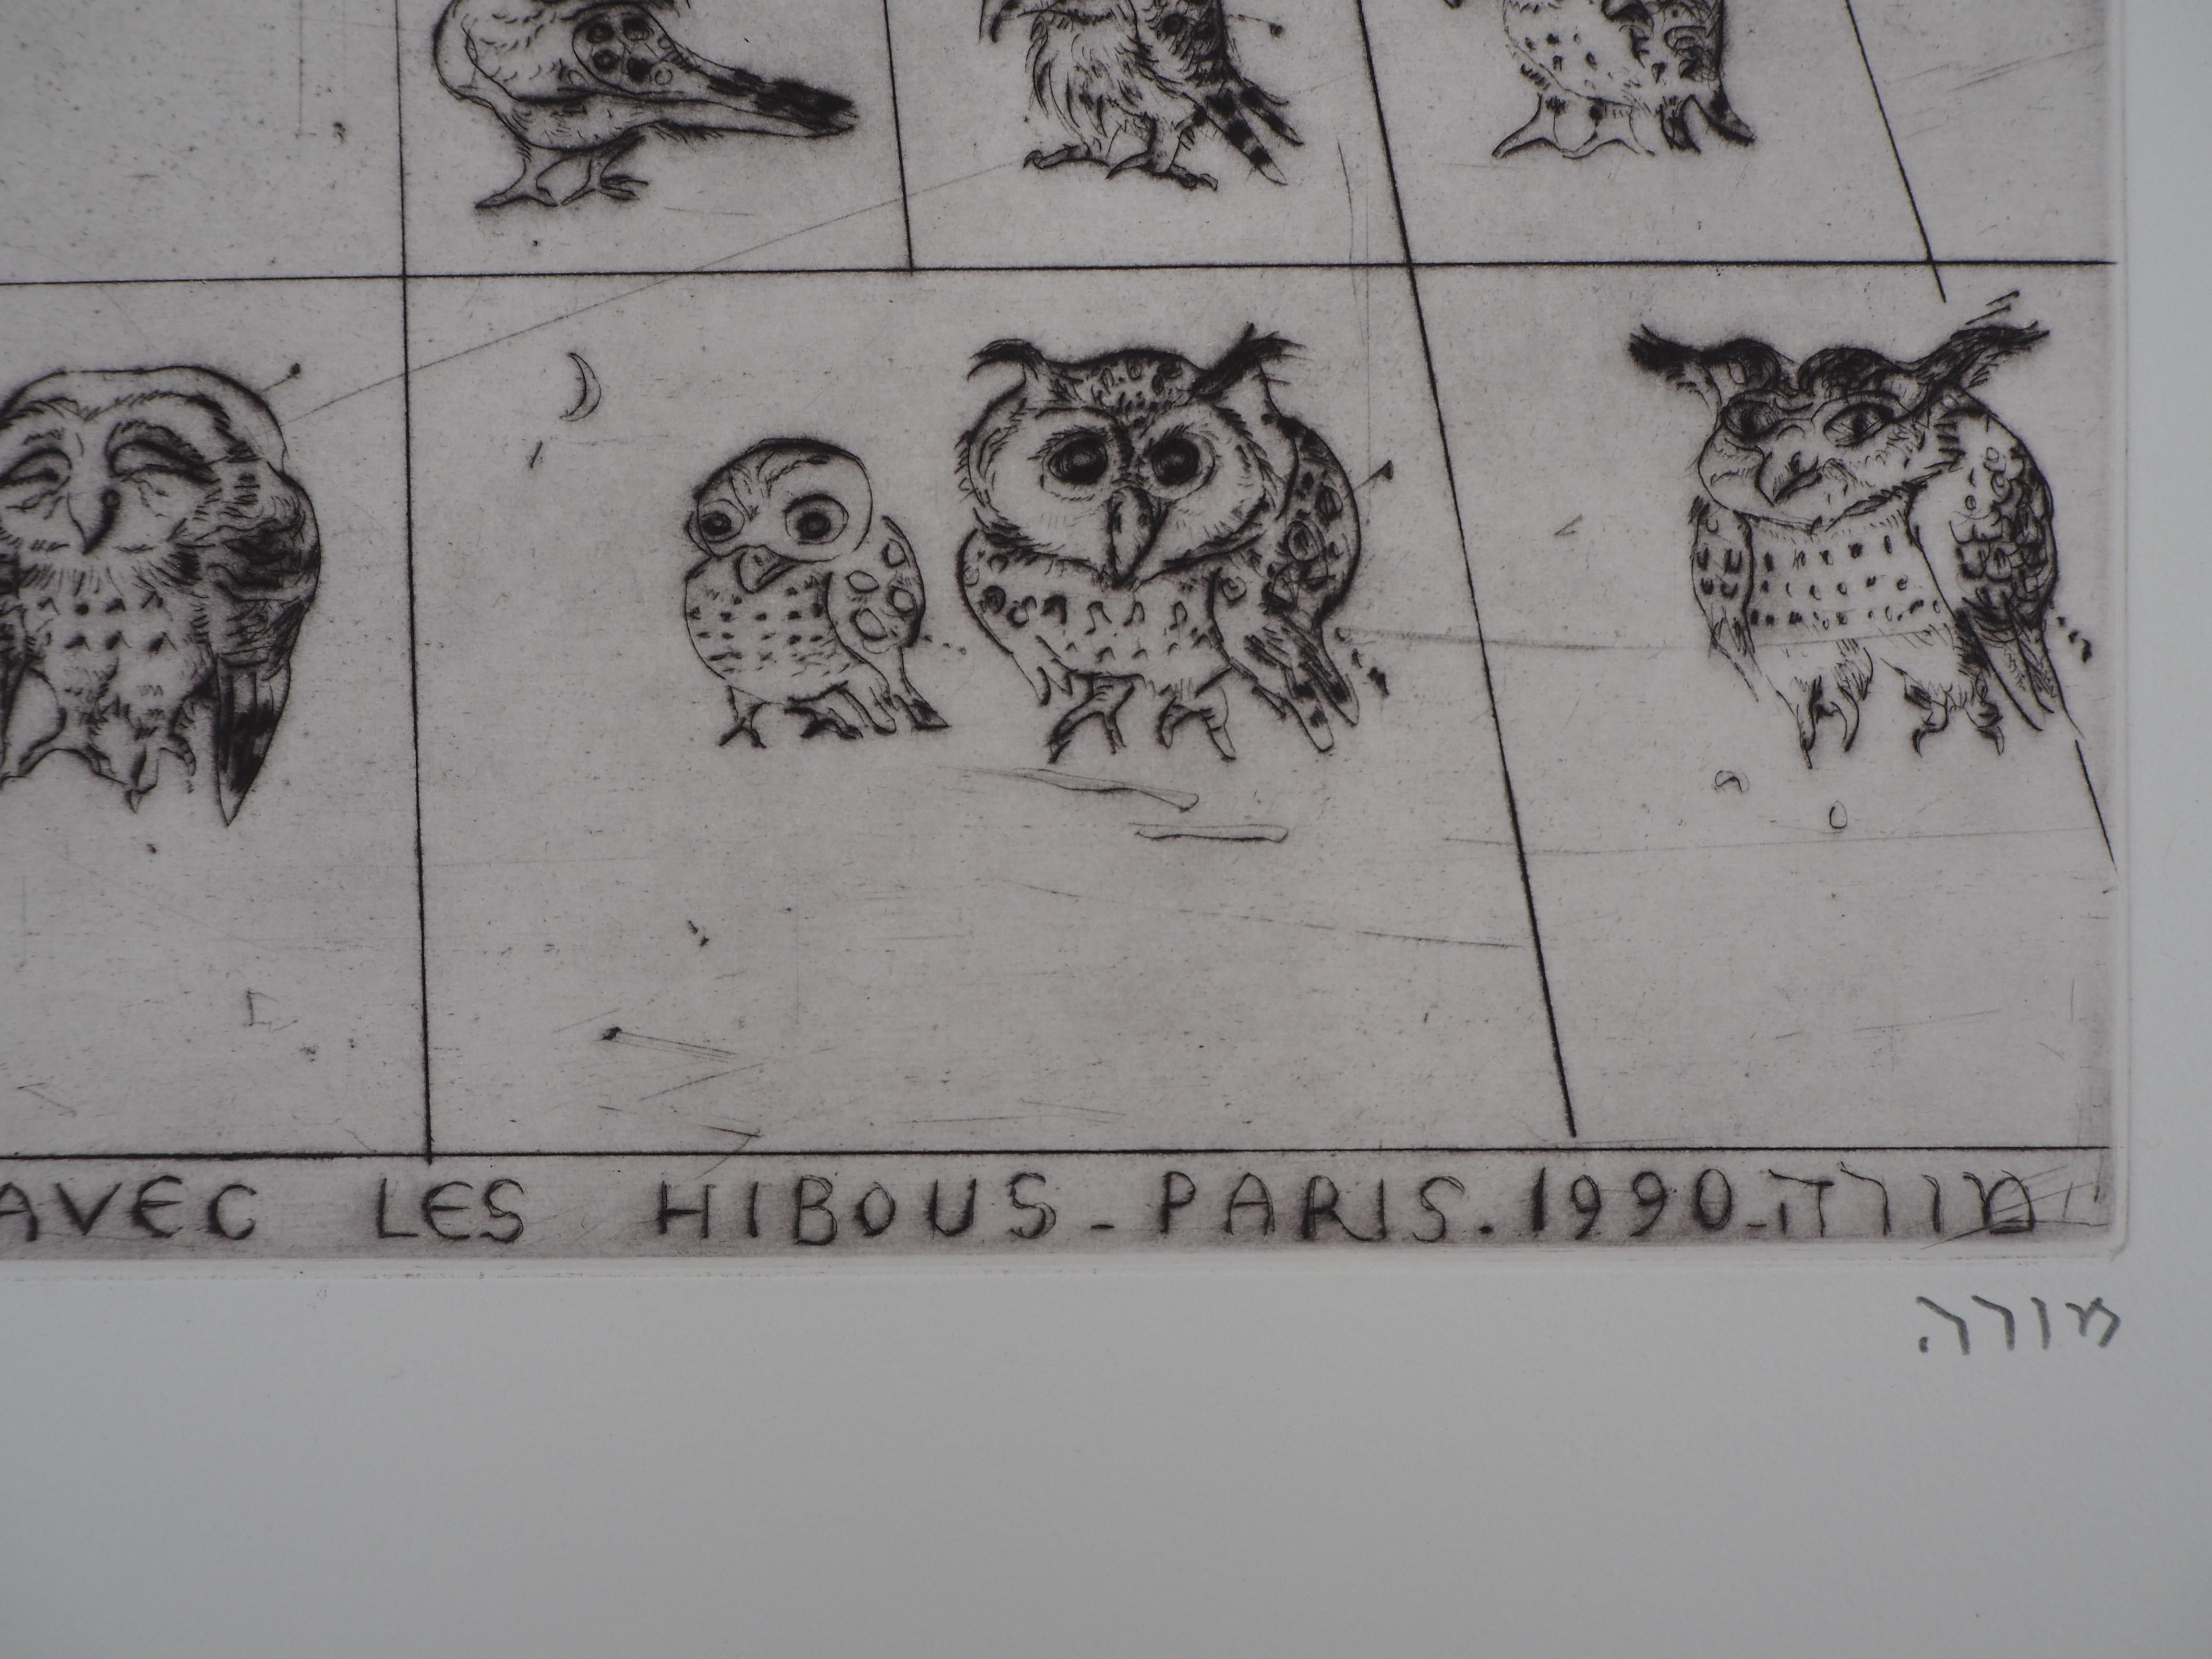  To Finish with the Owls - Original handsigned etching, Ltd 90 copies - Gray Figurative Print by Mordecai Moreh